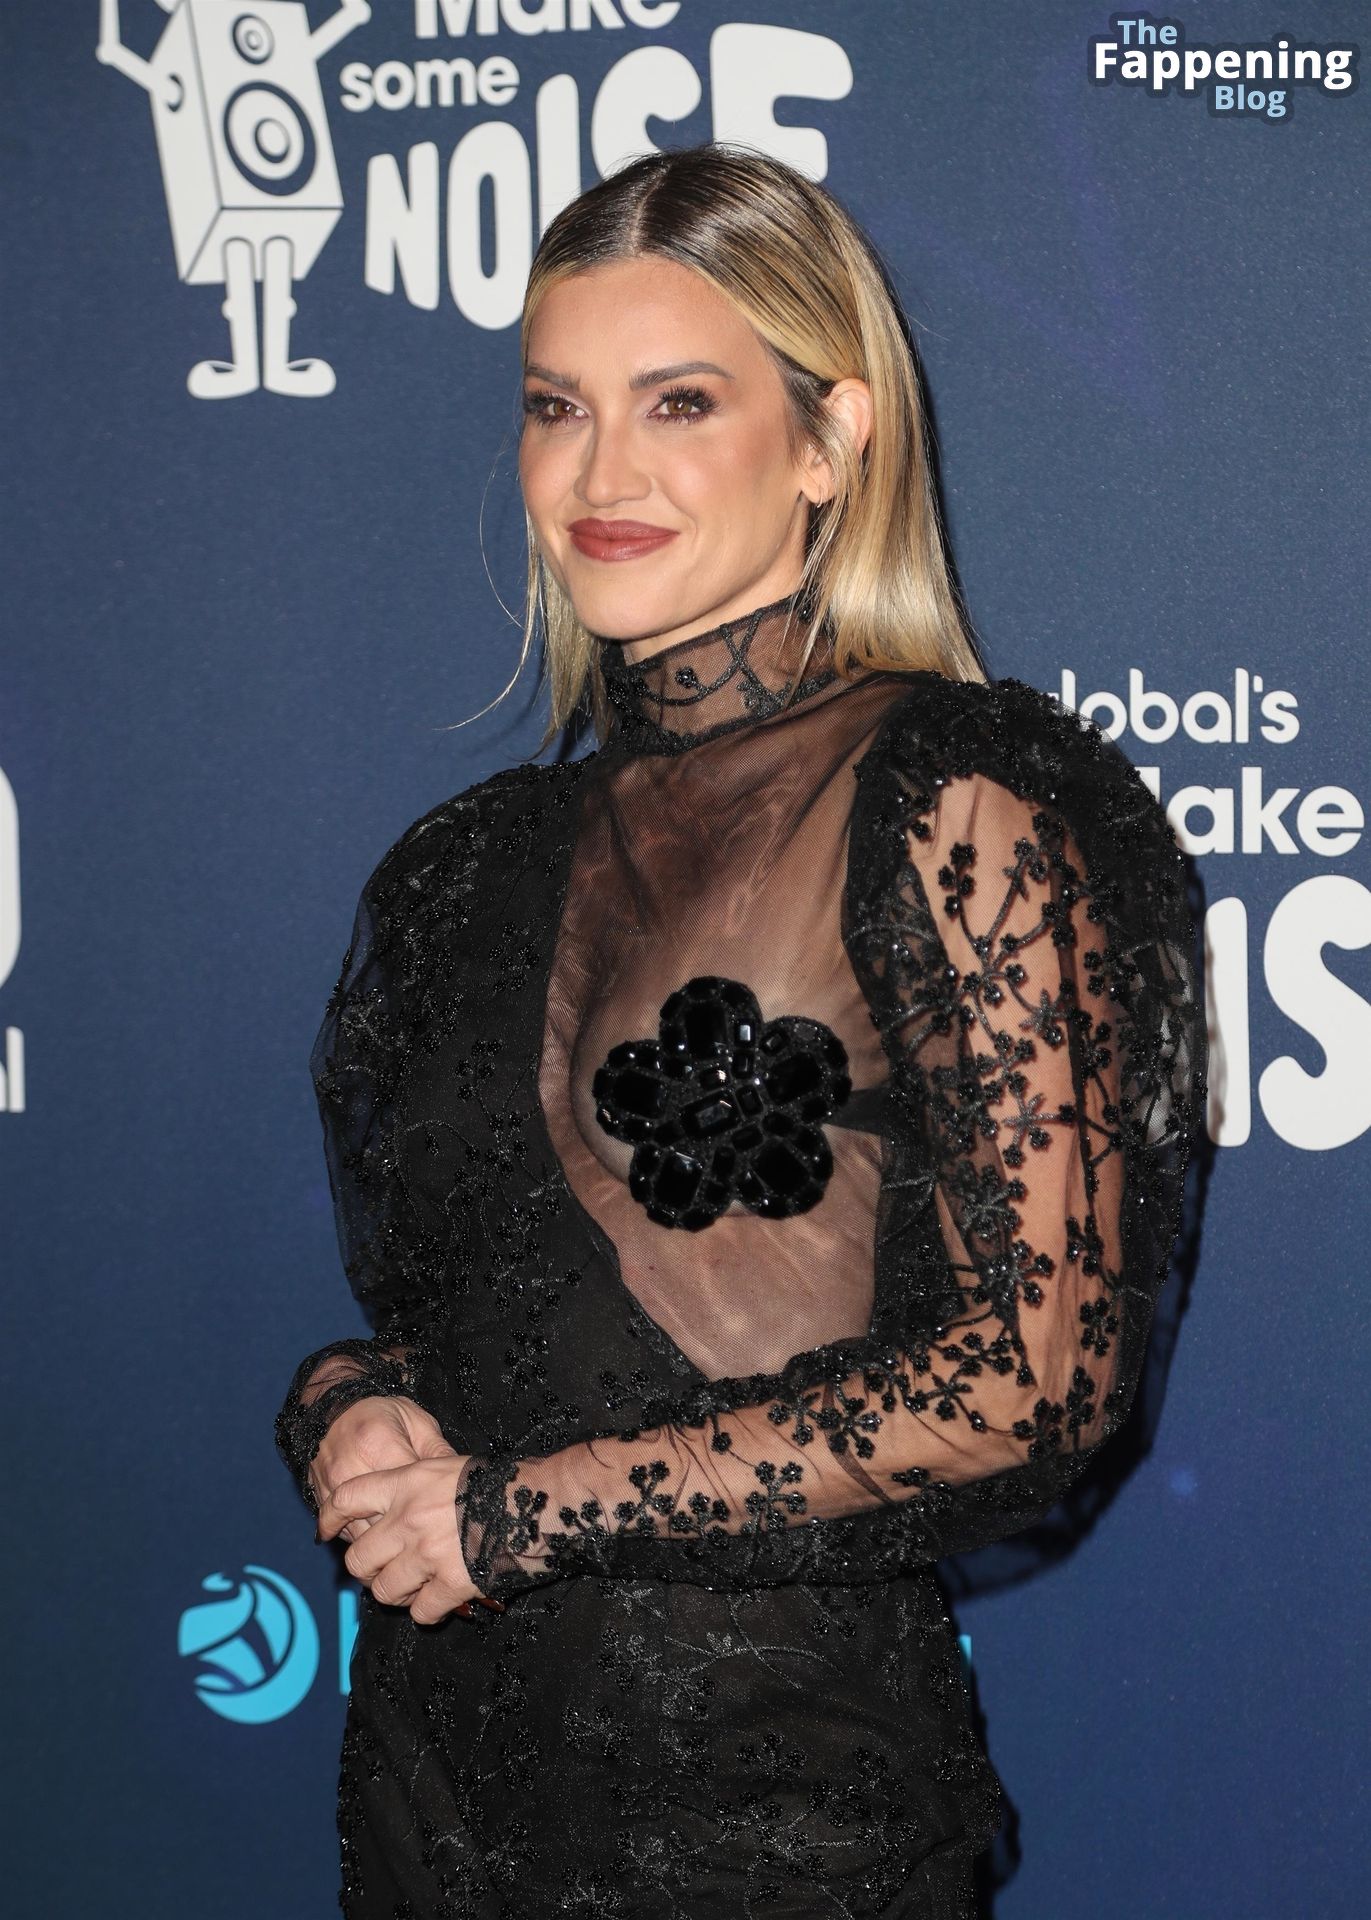 Ashley Roberts Goes Braless in a Lace Dress at Global’s Make Some Noise Charity Gala (39 Photos)